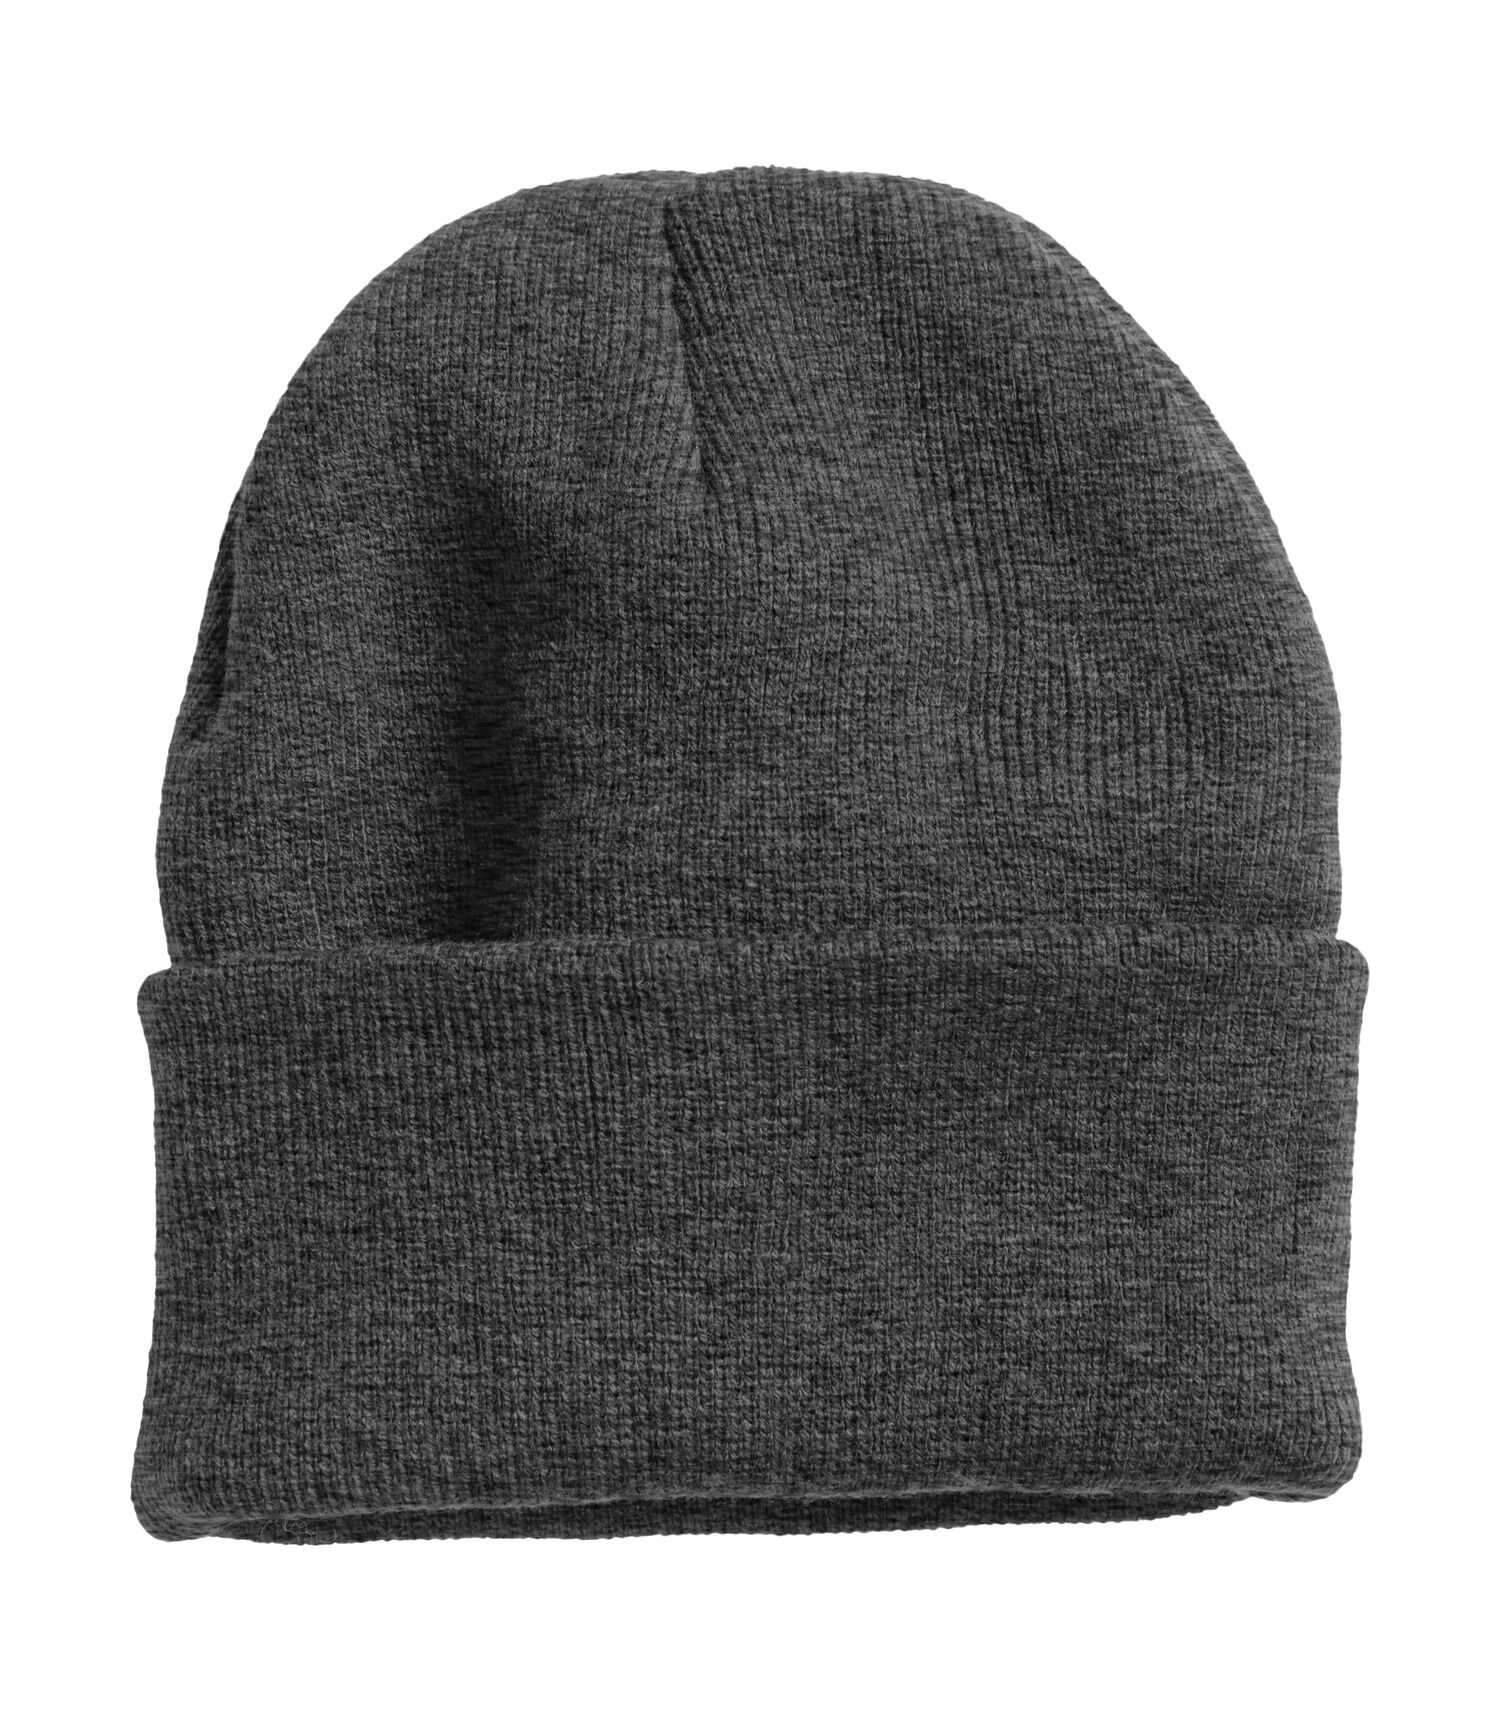 Ideal Knitwear Cuff Toque #101 Charcoal